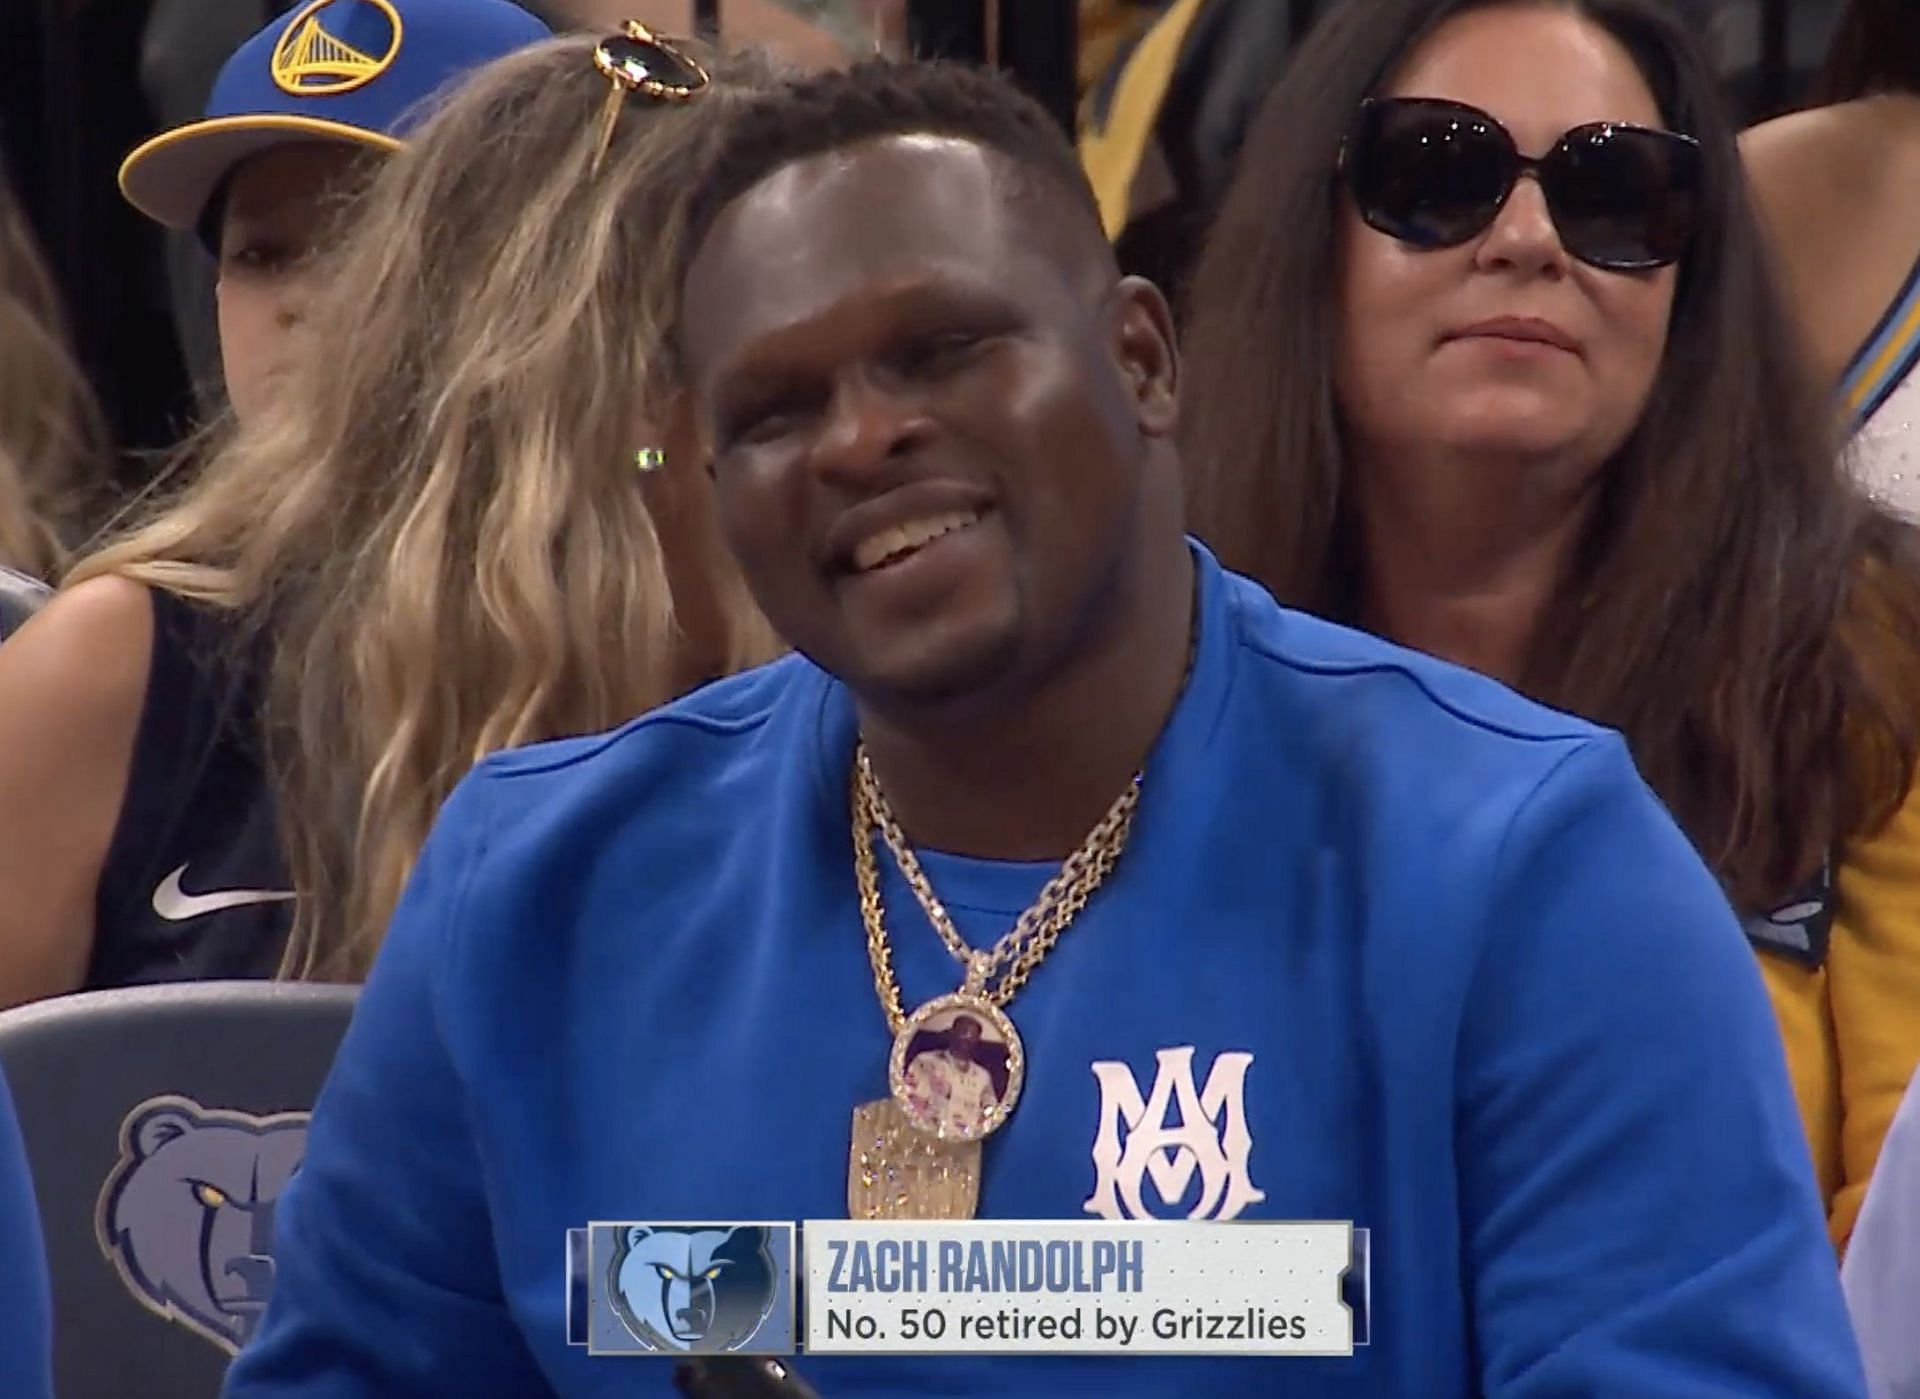 Zach Randolph came to cheer his former team, the Memphis Grizzlies, take on the Golden State Warriors tonight. [photo: Twitter]